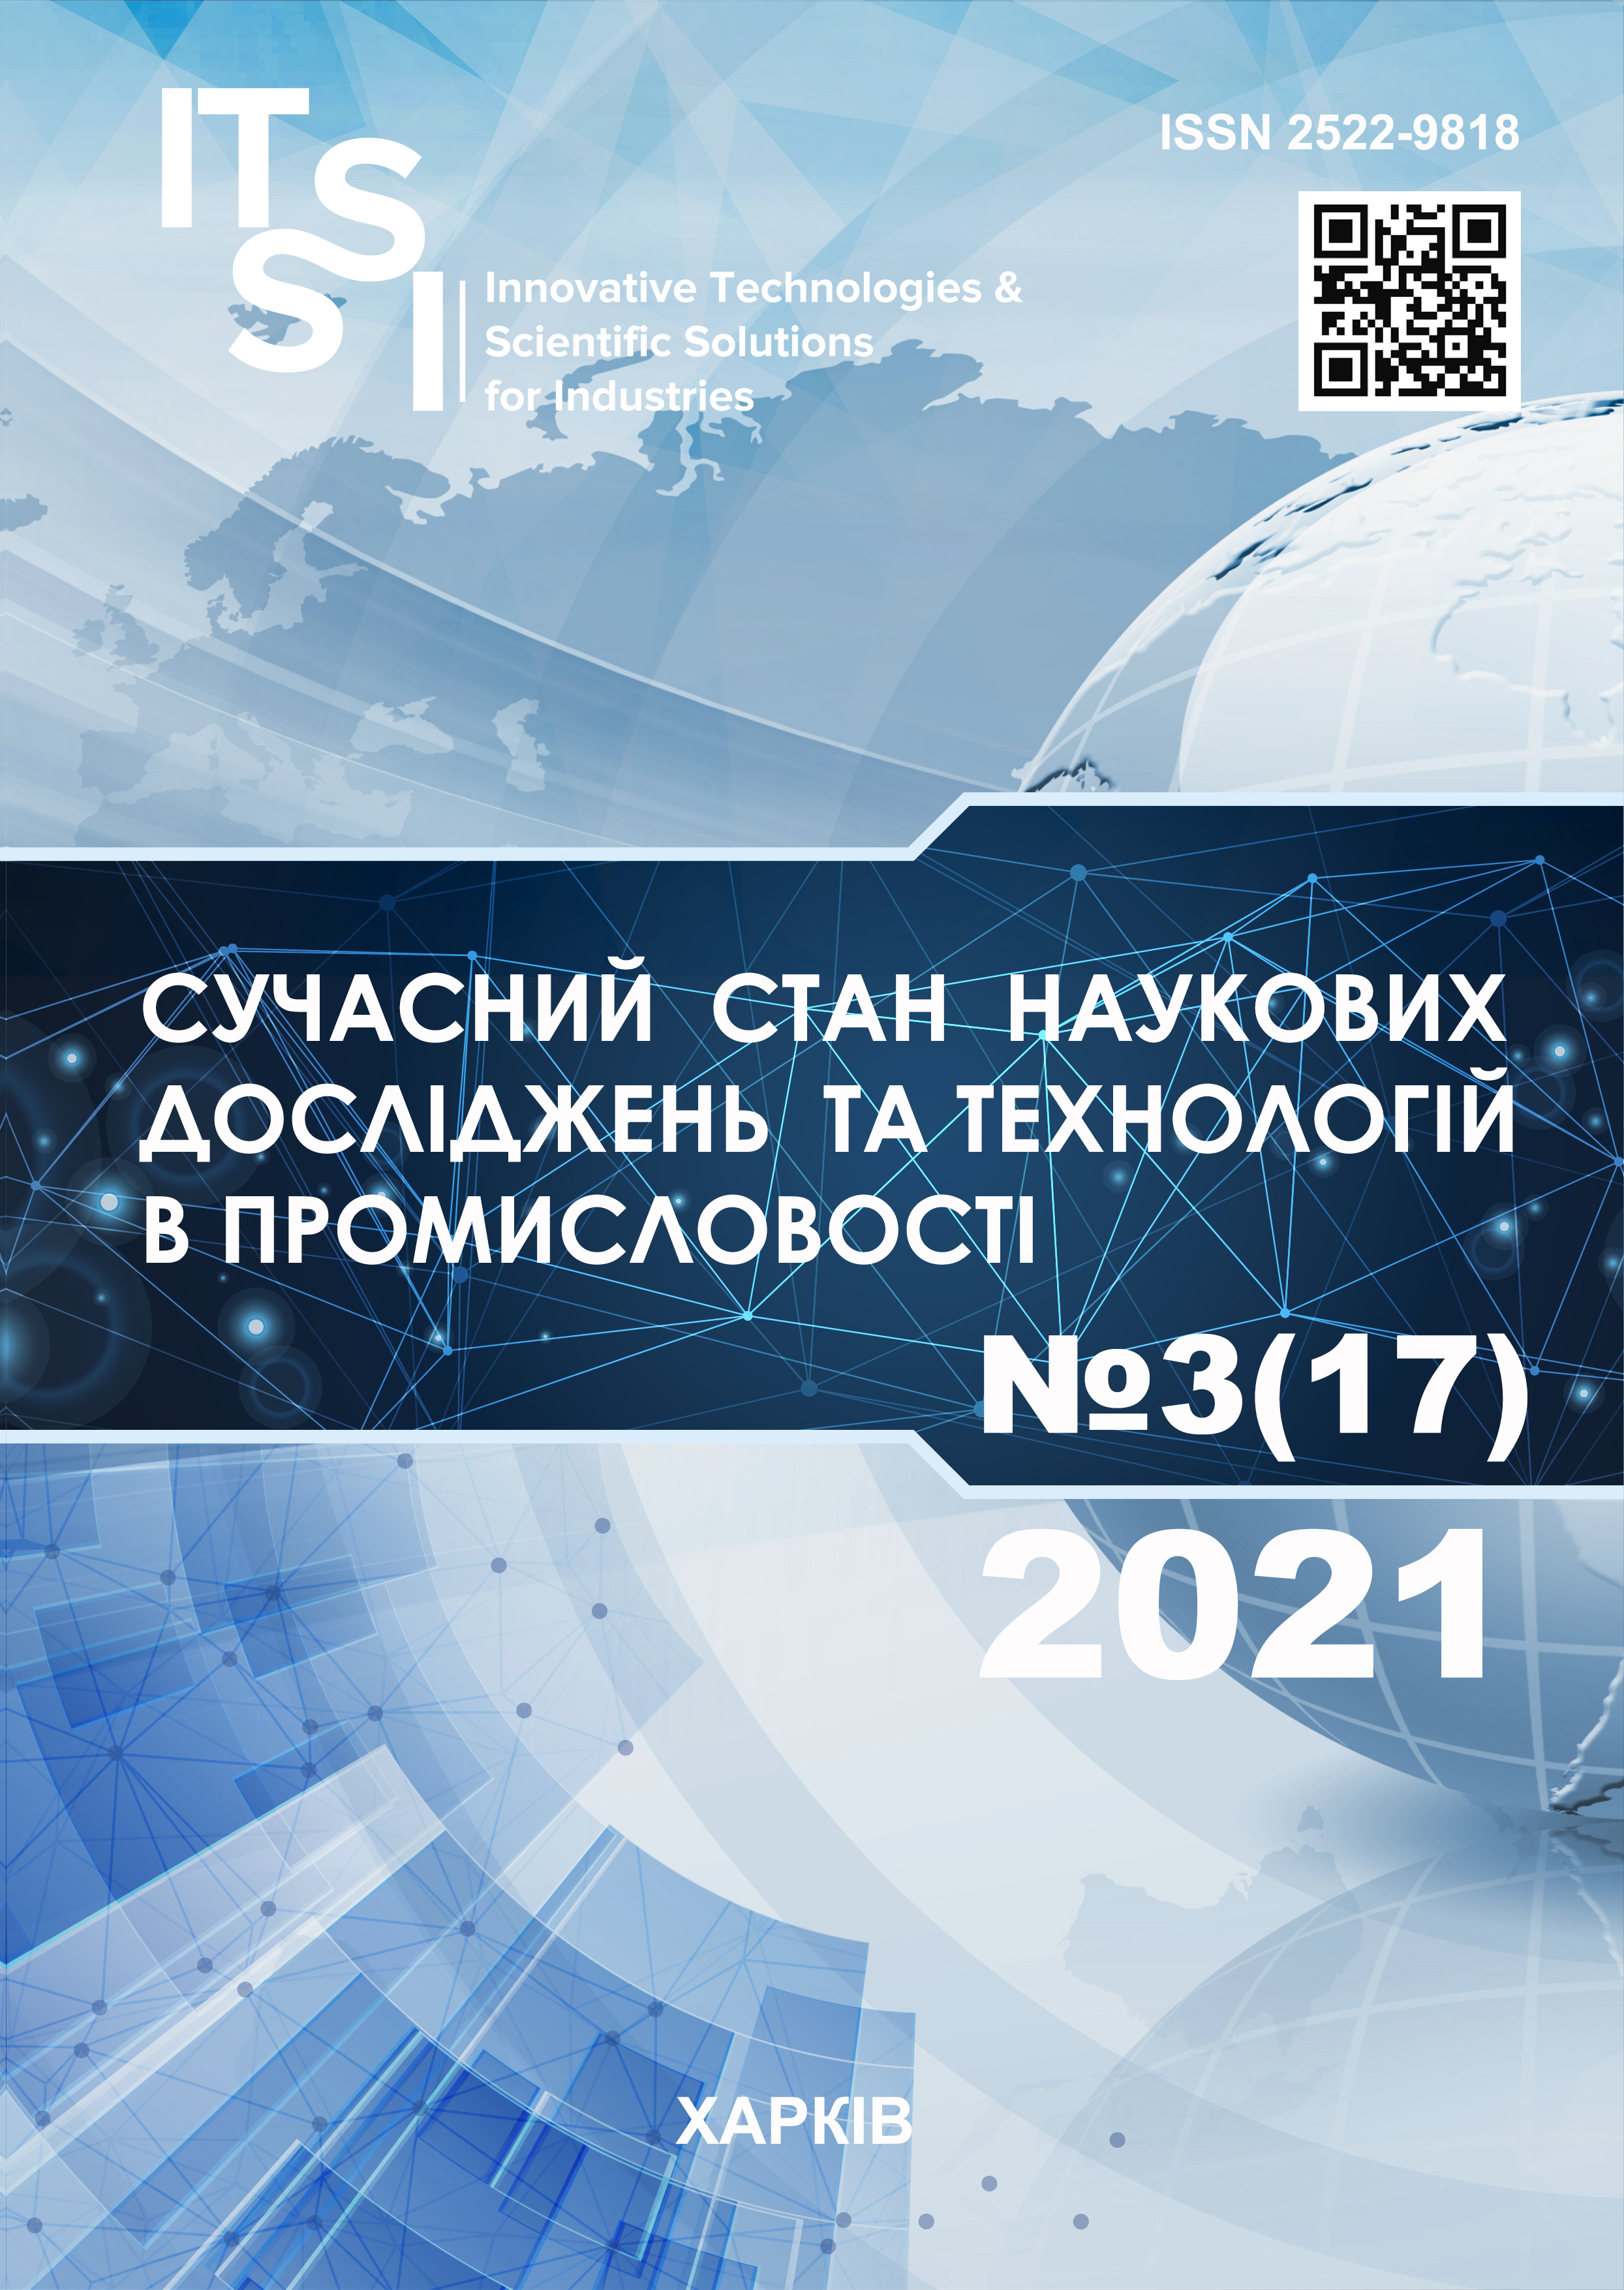 					View No. 3 (17) (2021): Innovative Technologies and Scientific Solutions for Industries
				